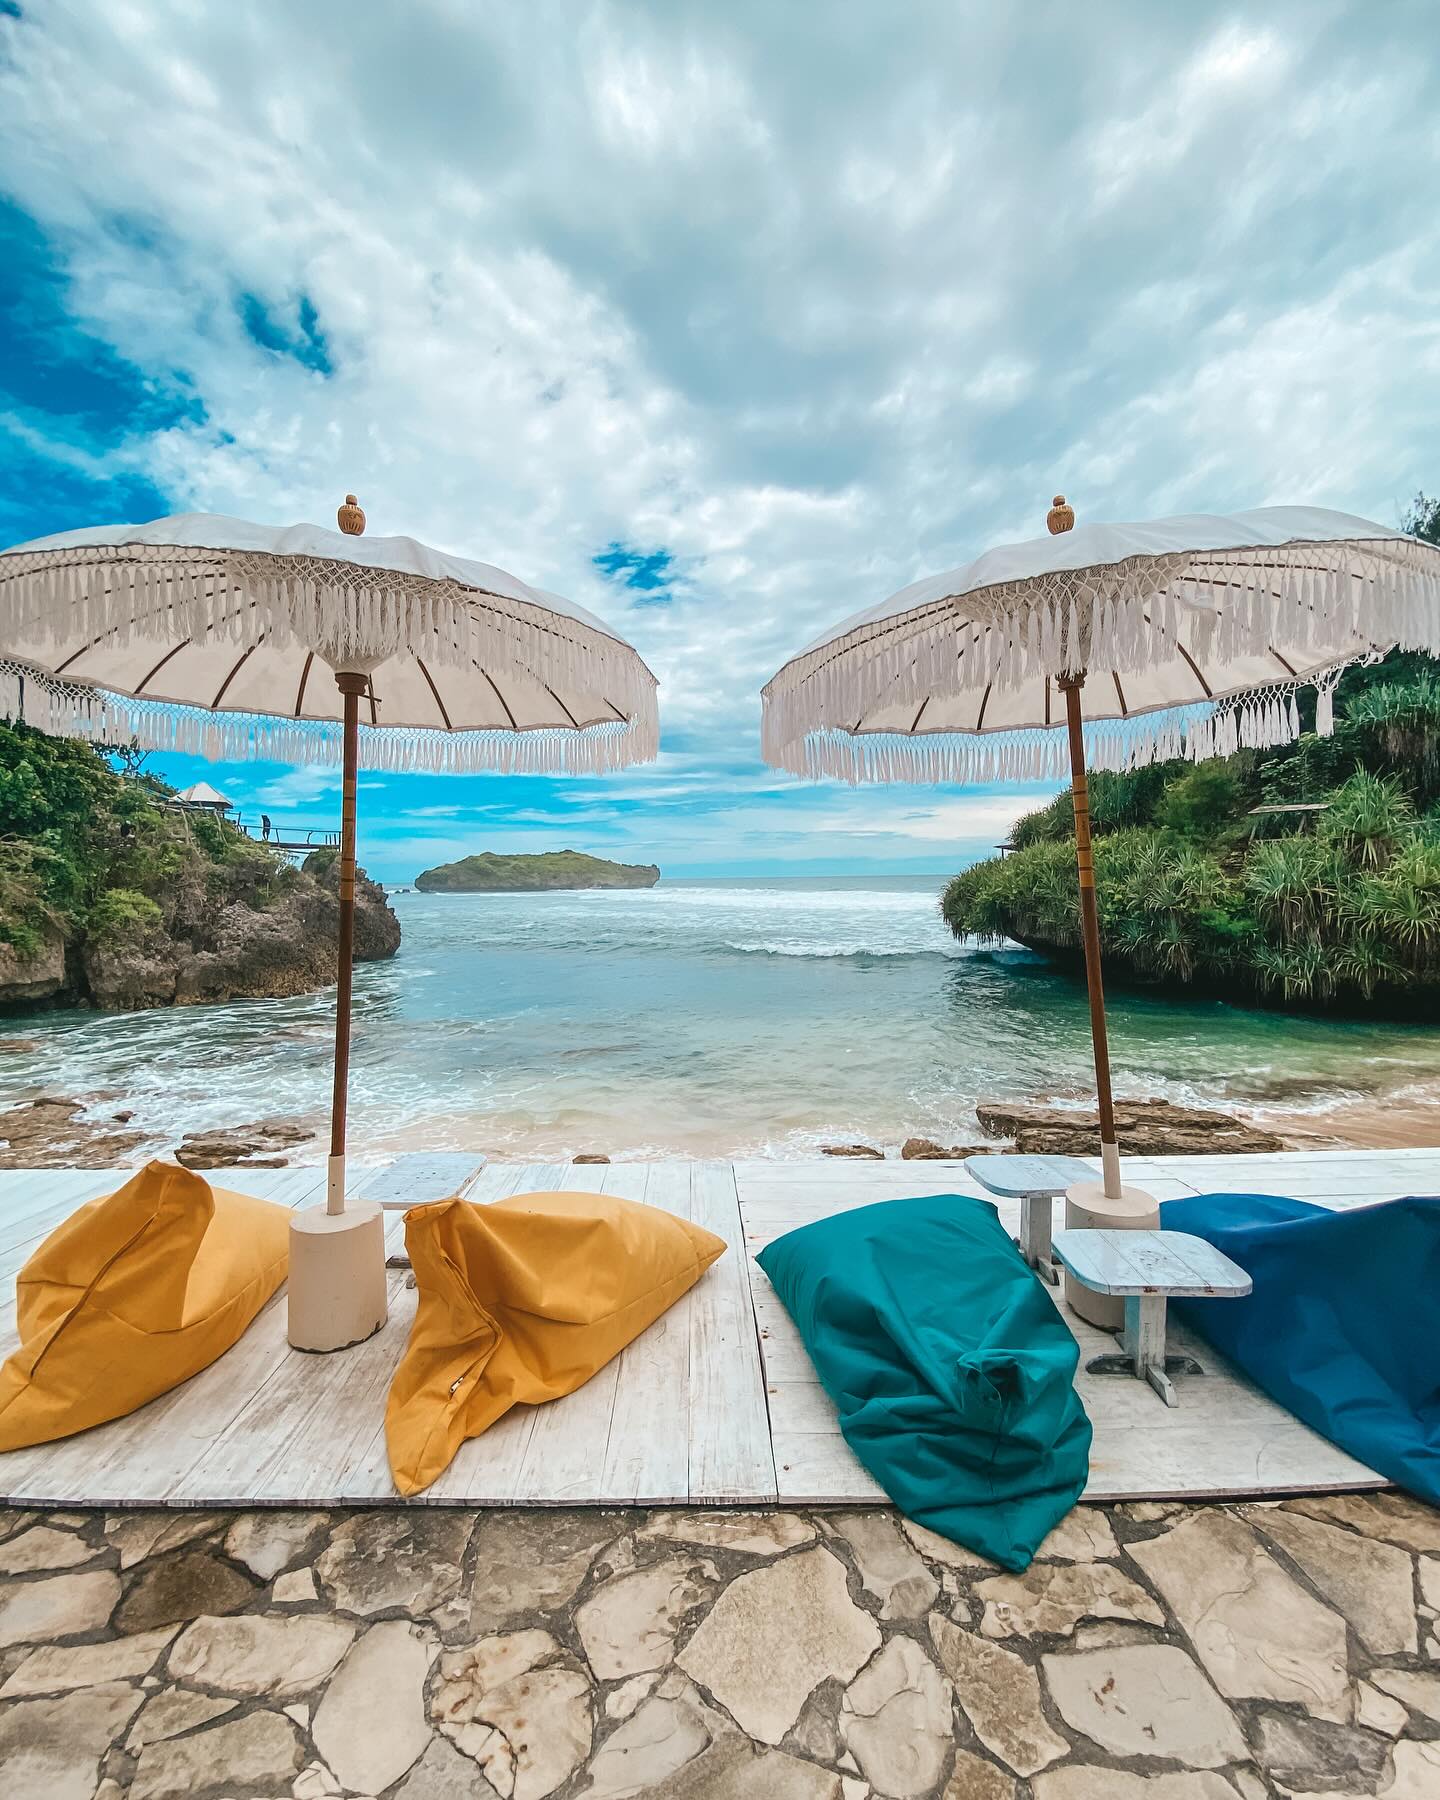 Beachside lounge area with colorful bean bags and umbrellas overlooking the ocean at Slili Beach.